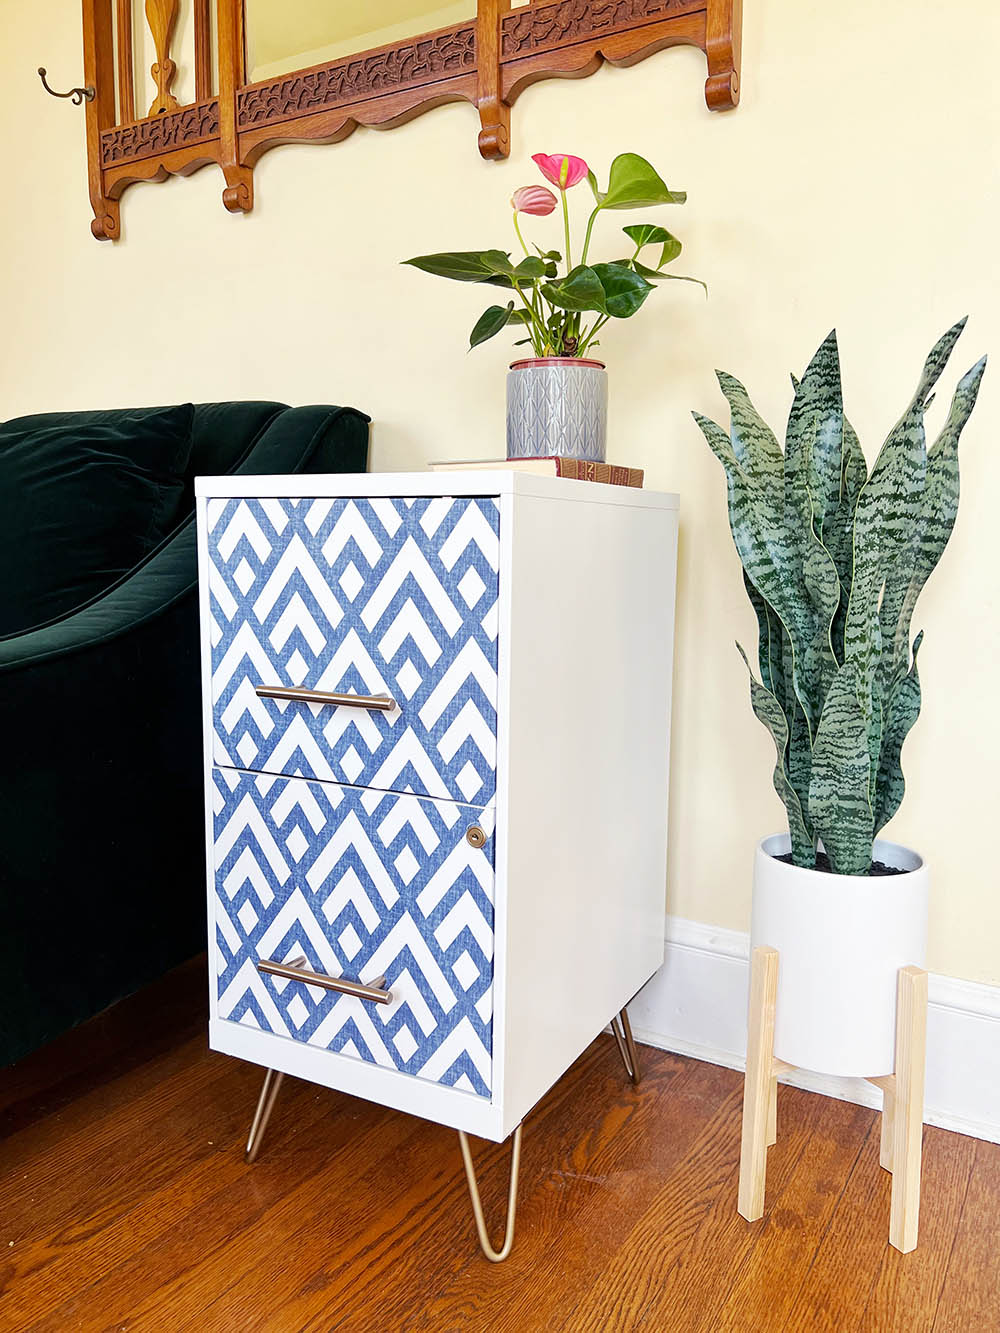 DIY File Cabinet Makeover with Peel and Stick Wallpaper